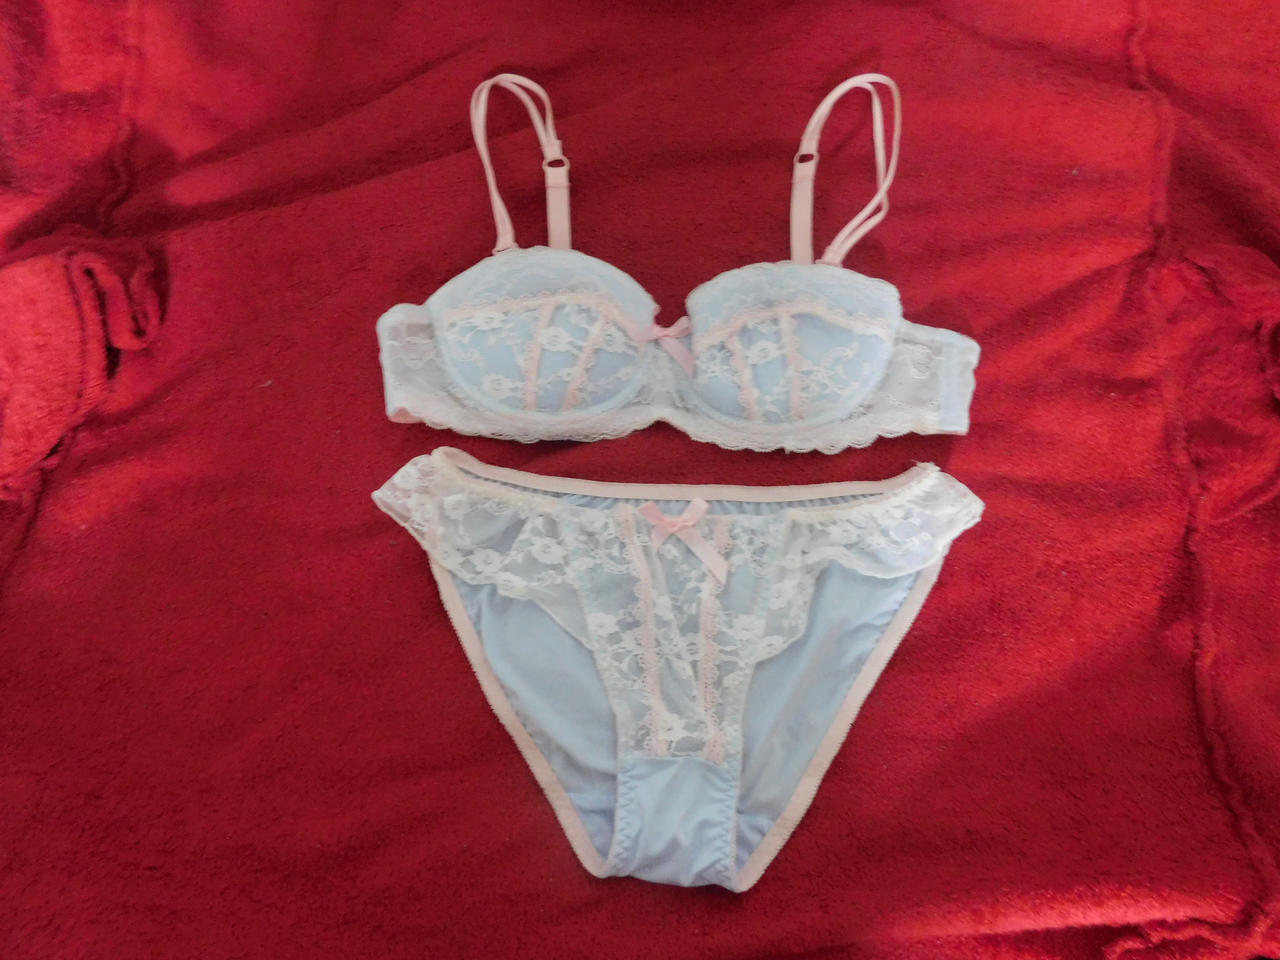 Bra and Panty set #3 by Tabassian990 on DeviantArt